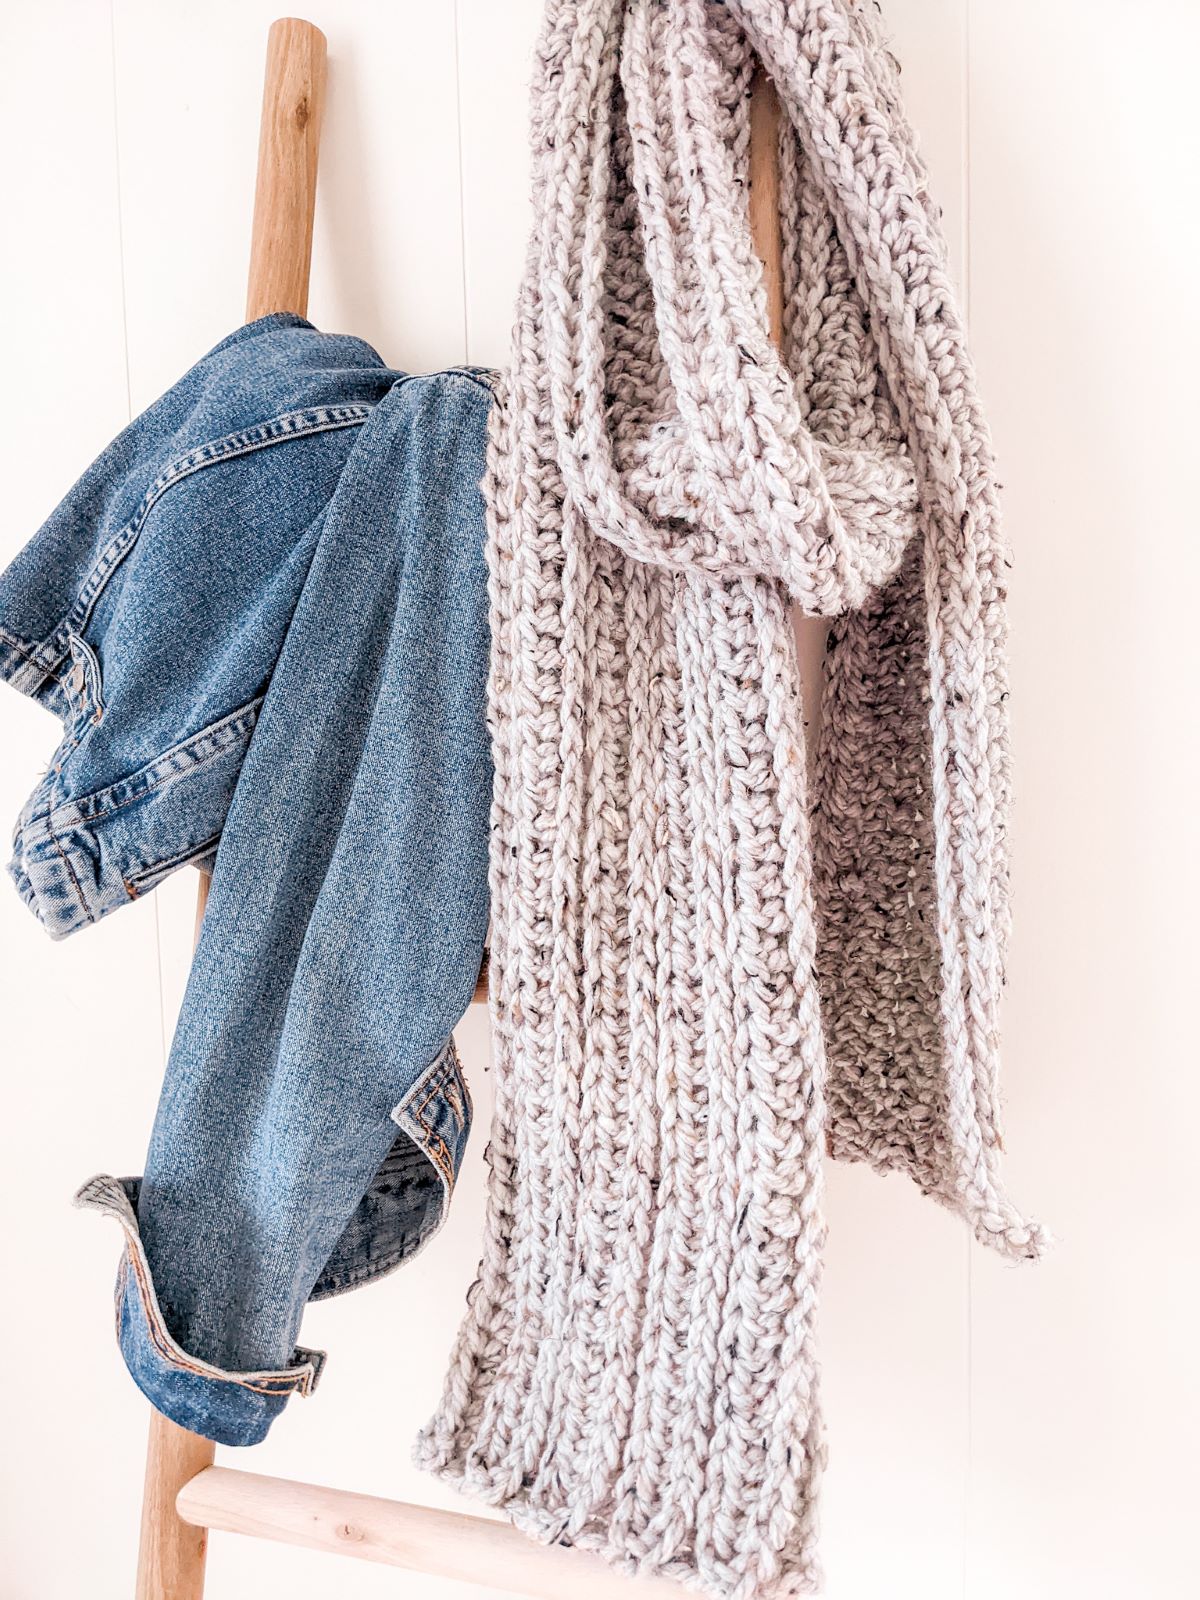 A chunky crochet scarf in the color grey draped on a decorative ladder.